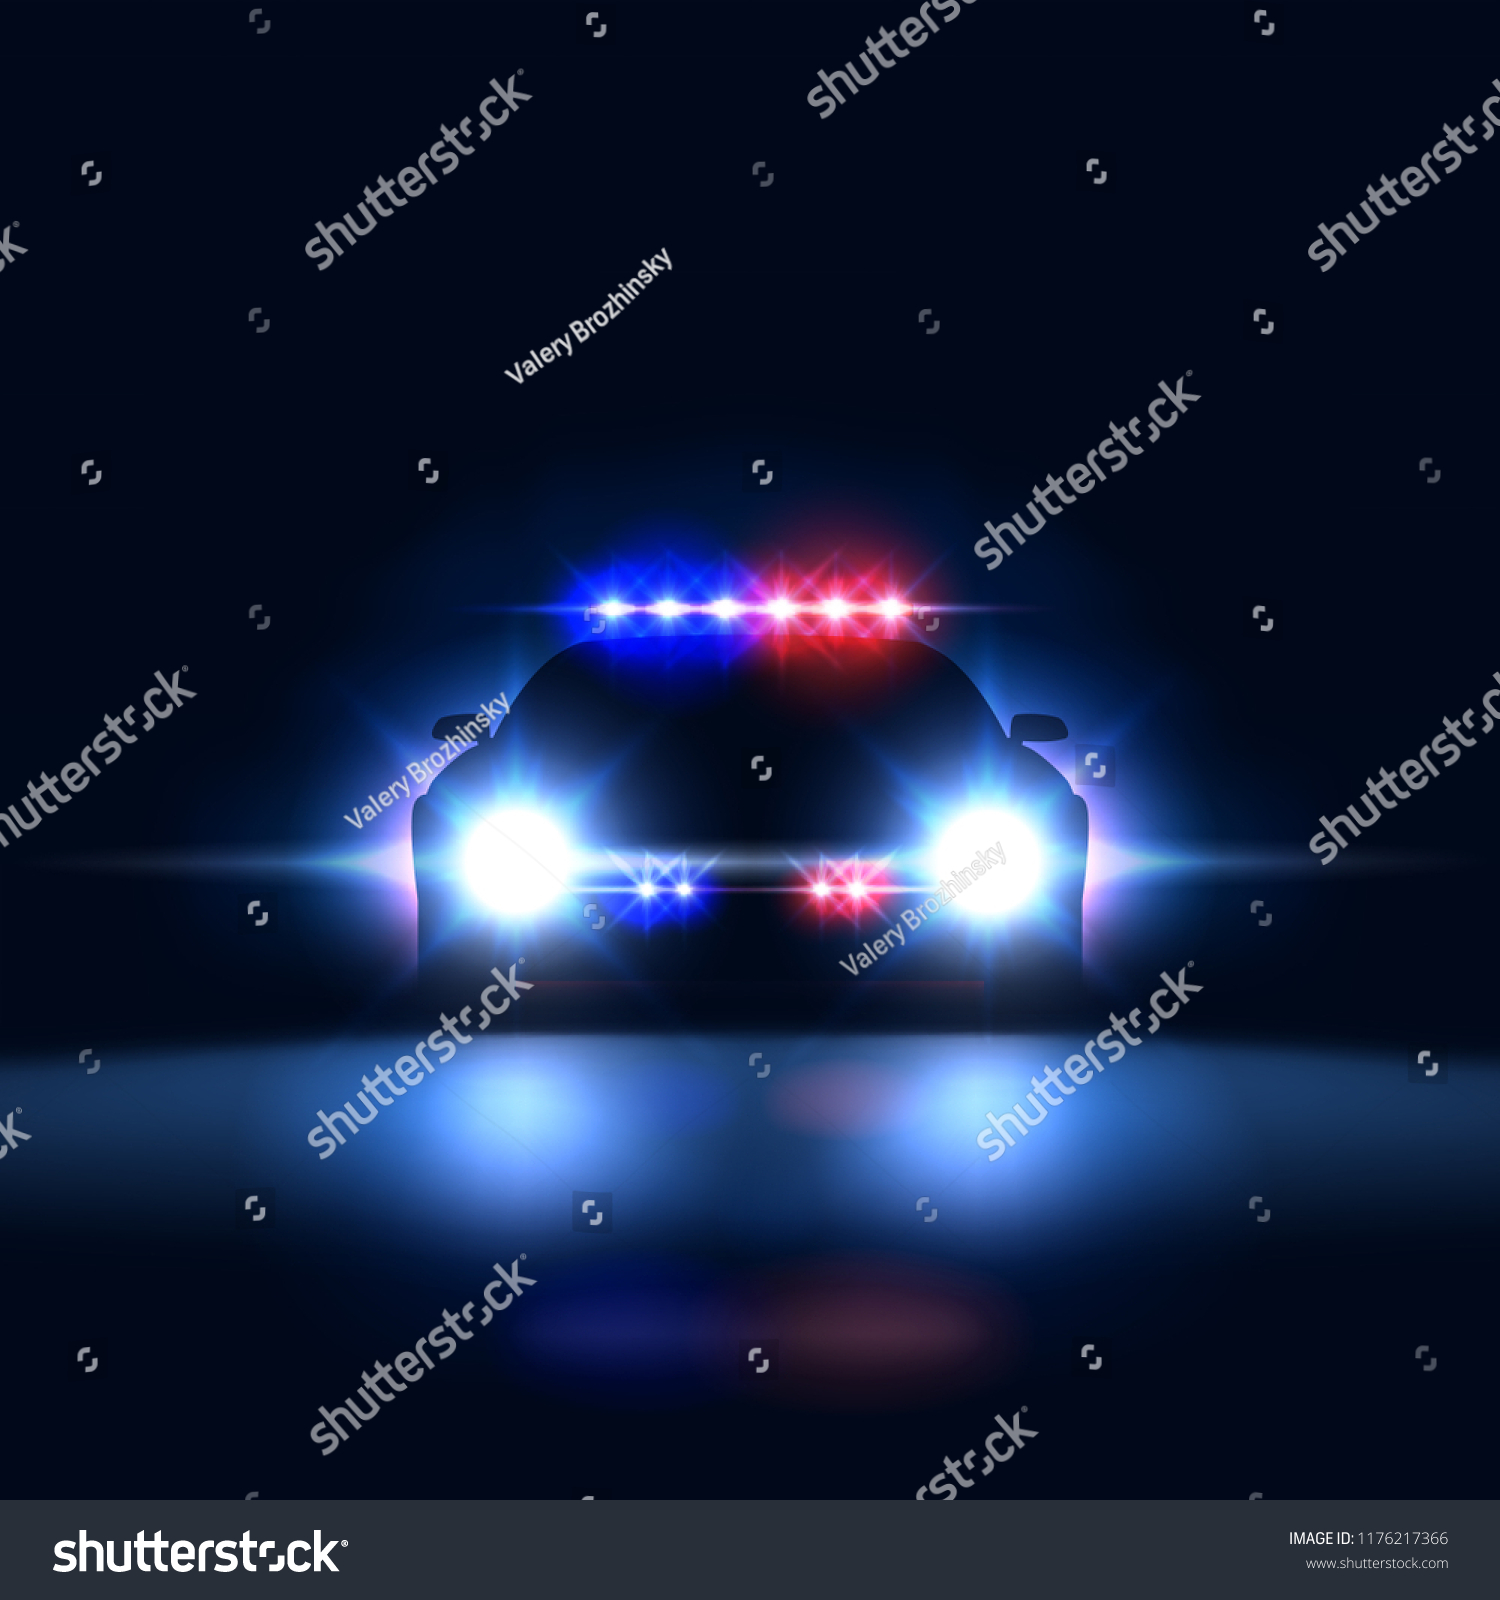 SVG of Police car sheriff at night with flashing light. Police security patrol on the car in the dark with a siren, vector illustration svg